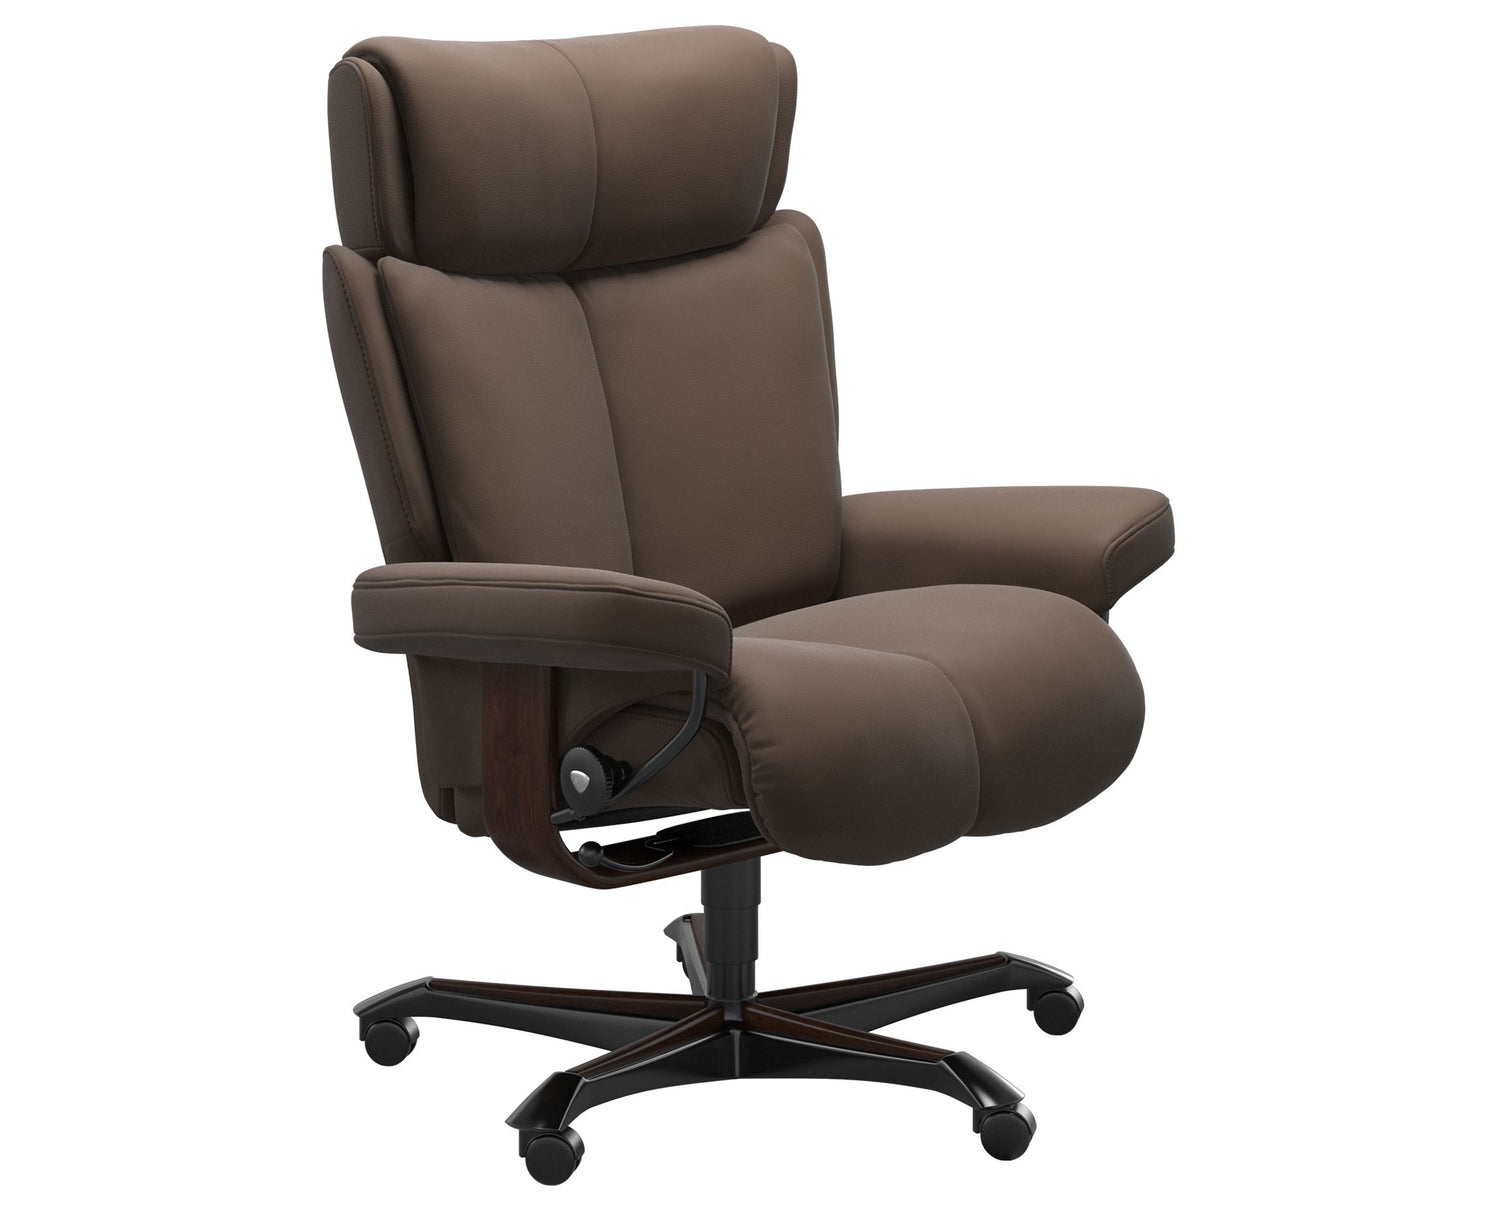 Paloma Leather Espresso M & Brown Base | Stressless Magic Home Office Chair | Valley Ridge Furniture